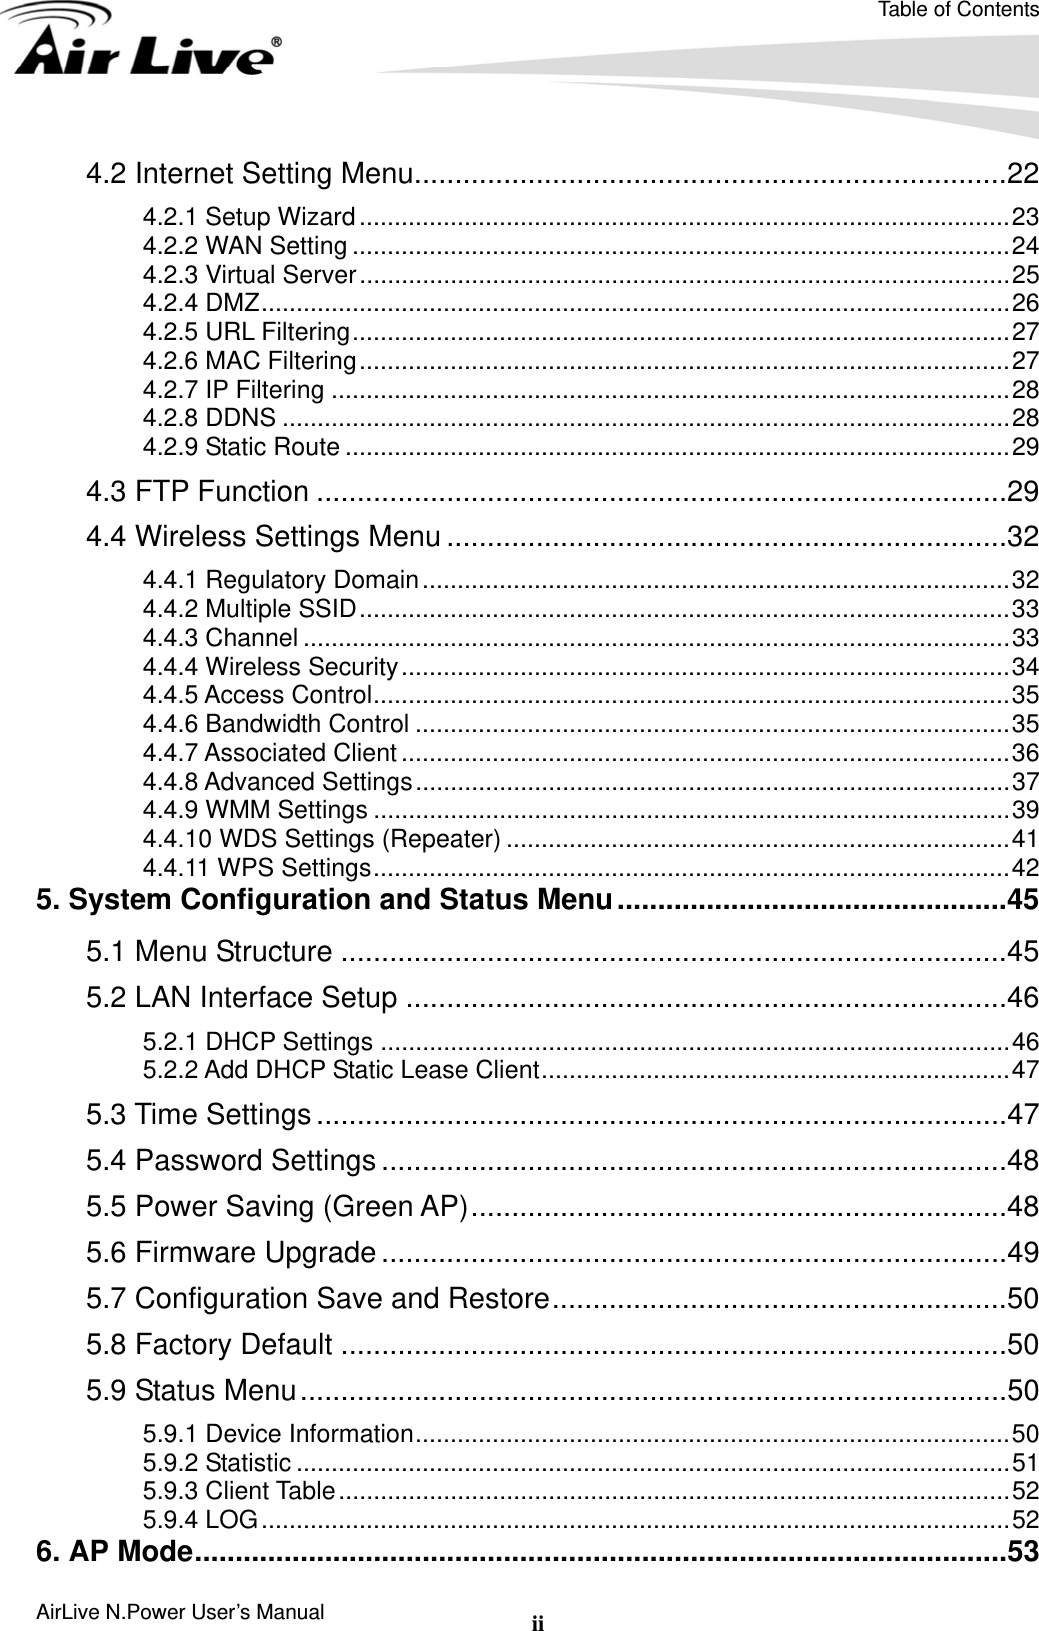 Table of Contents AirLive N.Power User’s Manual  ii4.2 Internet Setting Menu.........................................................................22 4.2.1 Setup Wizard.............................................................................................23 4.2.2 WAN Setting ..............................................................................................24 4.2.3 Virtual Server.............................................................................................25 4.2.4 DMZ...........................................................................................................26 4.2.5 URL Filtering..............................................................................................27 4.2.6 MAC Filtering.............................................................................................27 4.2.7 IP Filtering .................................................................................................28 4.2.8 DDNS ........................................................................................................28 4.2.9 Static Route ...............................................................................................29 4.3 FTP Function .....................................................................................29 4.4 Wireless Settings Menu .....................................................................32 4.4.1 Regulatory Domain....................................................................................32 4.4.2 Multiple SSID.............................................................................................33 4.4.3 Channel .....................................................................................................33 4.4.4 Wireless Security.......................................................................................34 4.4.5 Access Control...........................................................................................35 4.4.6 Bandwidth Control .....................................................................................35 4.4.7 Associated Client .......................................................................................36 4.4.8 Advanced Settings.....................................................................................37 4.4.9 WMM Settings ...........................................................................................39 4.4.10 WDS Settings (Repeater) ........................................................................41 4.4.11 WPS Settings...........................................................................................42 5. System Configuration and Status Menu................................................45 5.1 Menu Structure ..................................................................................45 5.2 LAN Interface Setup ..........................................................................46 5.2.1 DHCP Settings ..........................................................................................46 5.2.2 Add DHCP Static Lease Client...................................................................47 5.3 Time Settings .....................................................................................47 5.4 Password Settings .............................................................................48 5.5 Power Saving (Green AP)..................................................................48 5.6 Firmware Upgrade .............................................................................49 5.7 Configuration Save and Restore........................................................50 5.8 Factory Default ..................................................................................50 5.9 Status Menu.......................................................................................50 5.9.1 Device Information.....................................................................................50 5.9.2 Statistic ......................................................................................................51 5.9.3 Client Table................................................................................................52 5.9.4 LOG...........................................................................................................52 6. AP Mode....................................................................................................53 